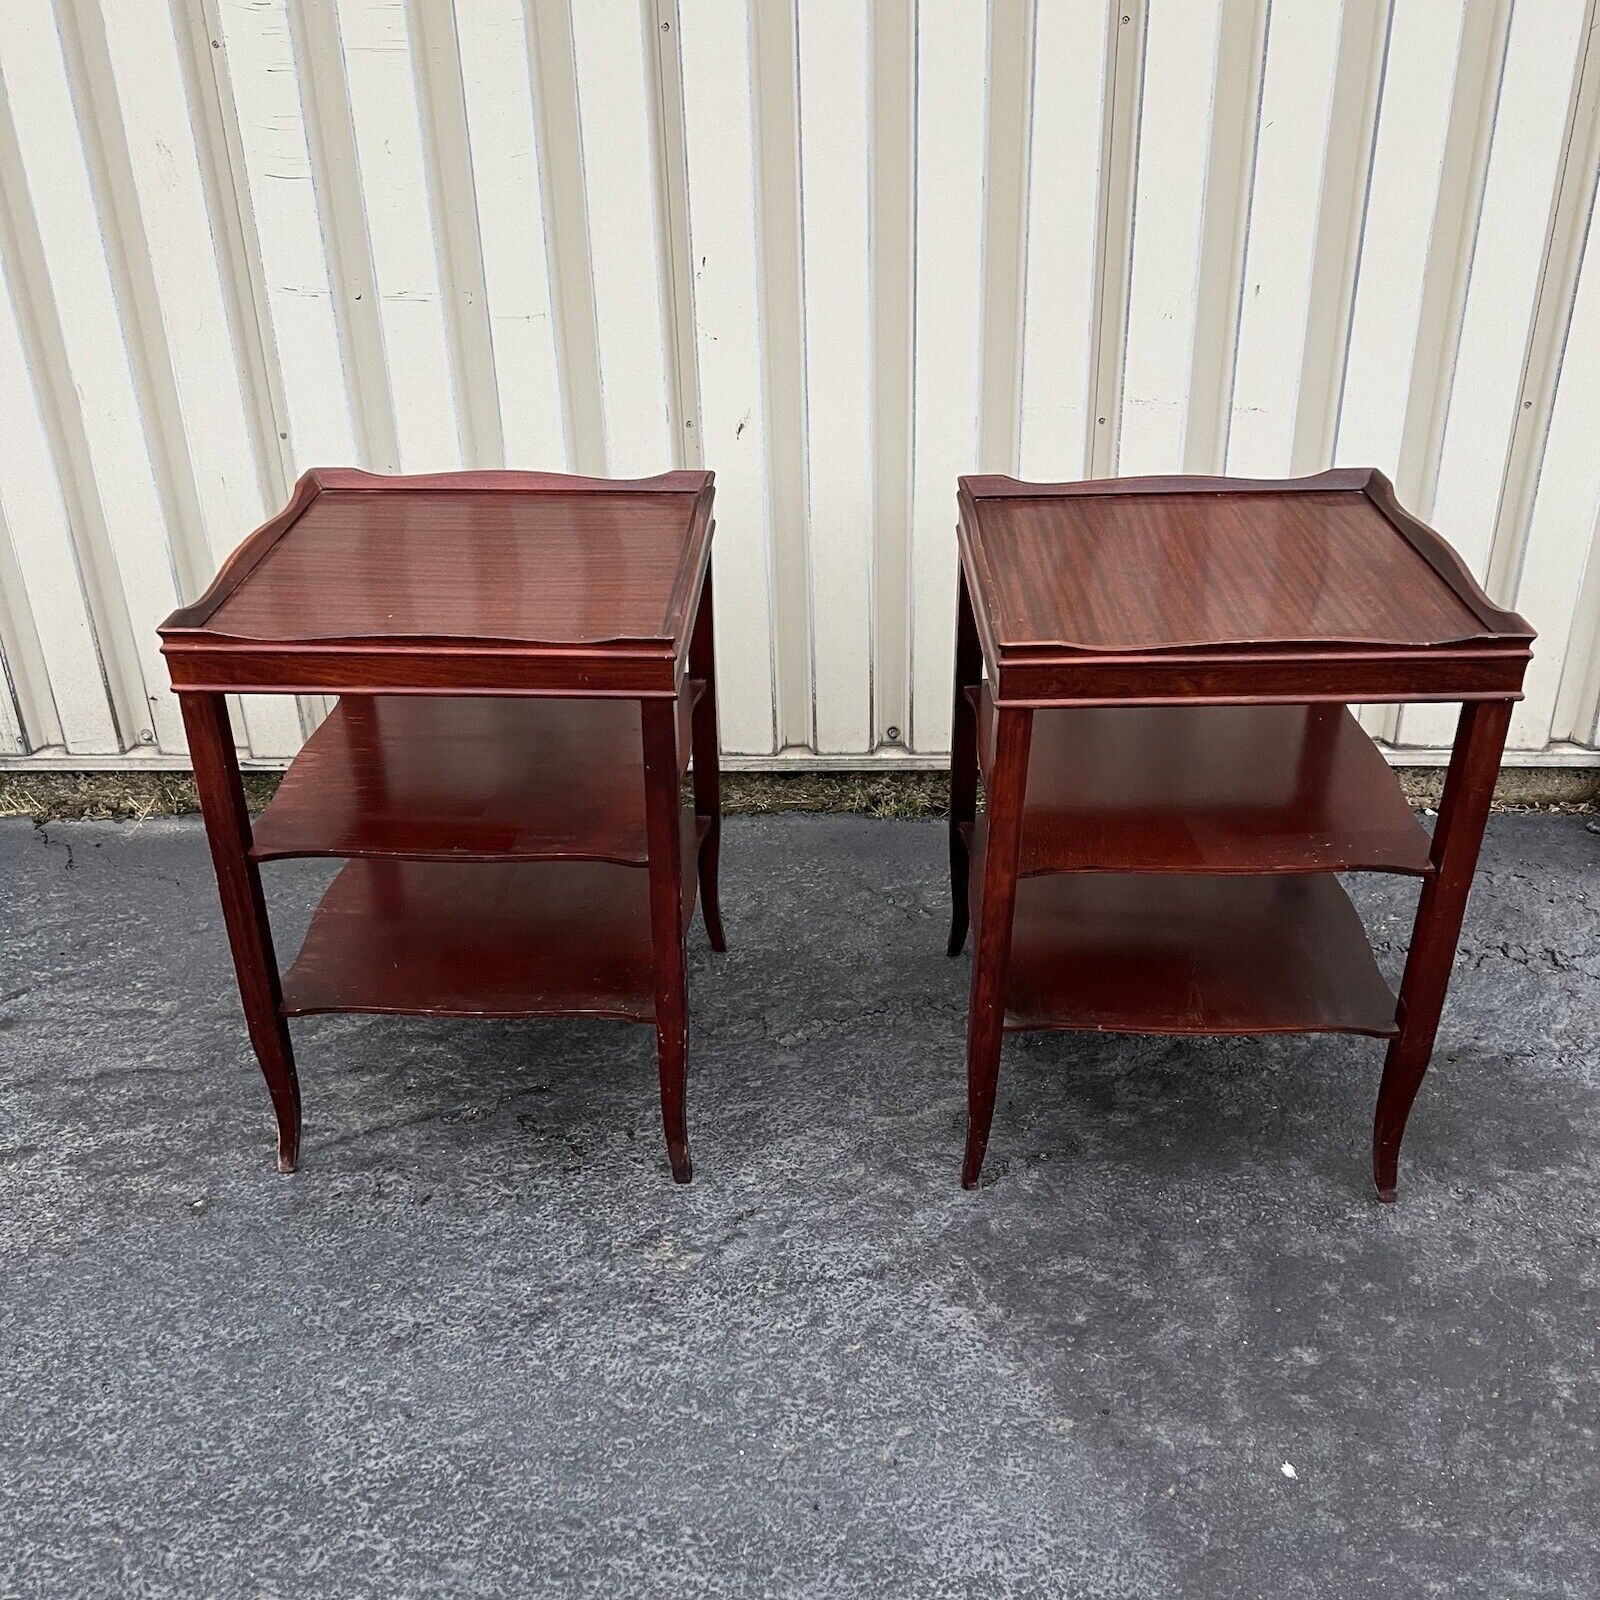 Beautiful Solid Walnut THREE TIER SIDE/ END/ LAMP TABLE Pair of 2 (Local Pickup)